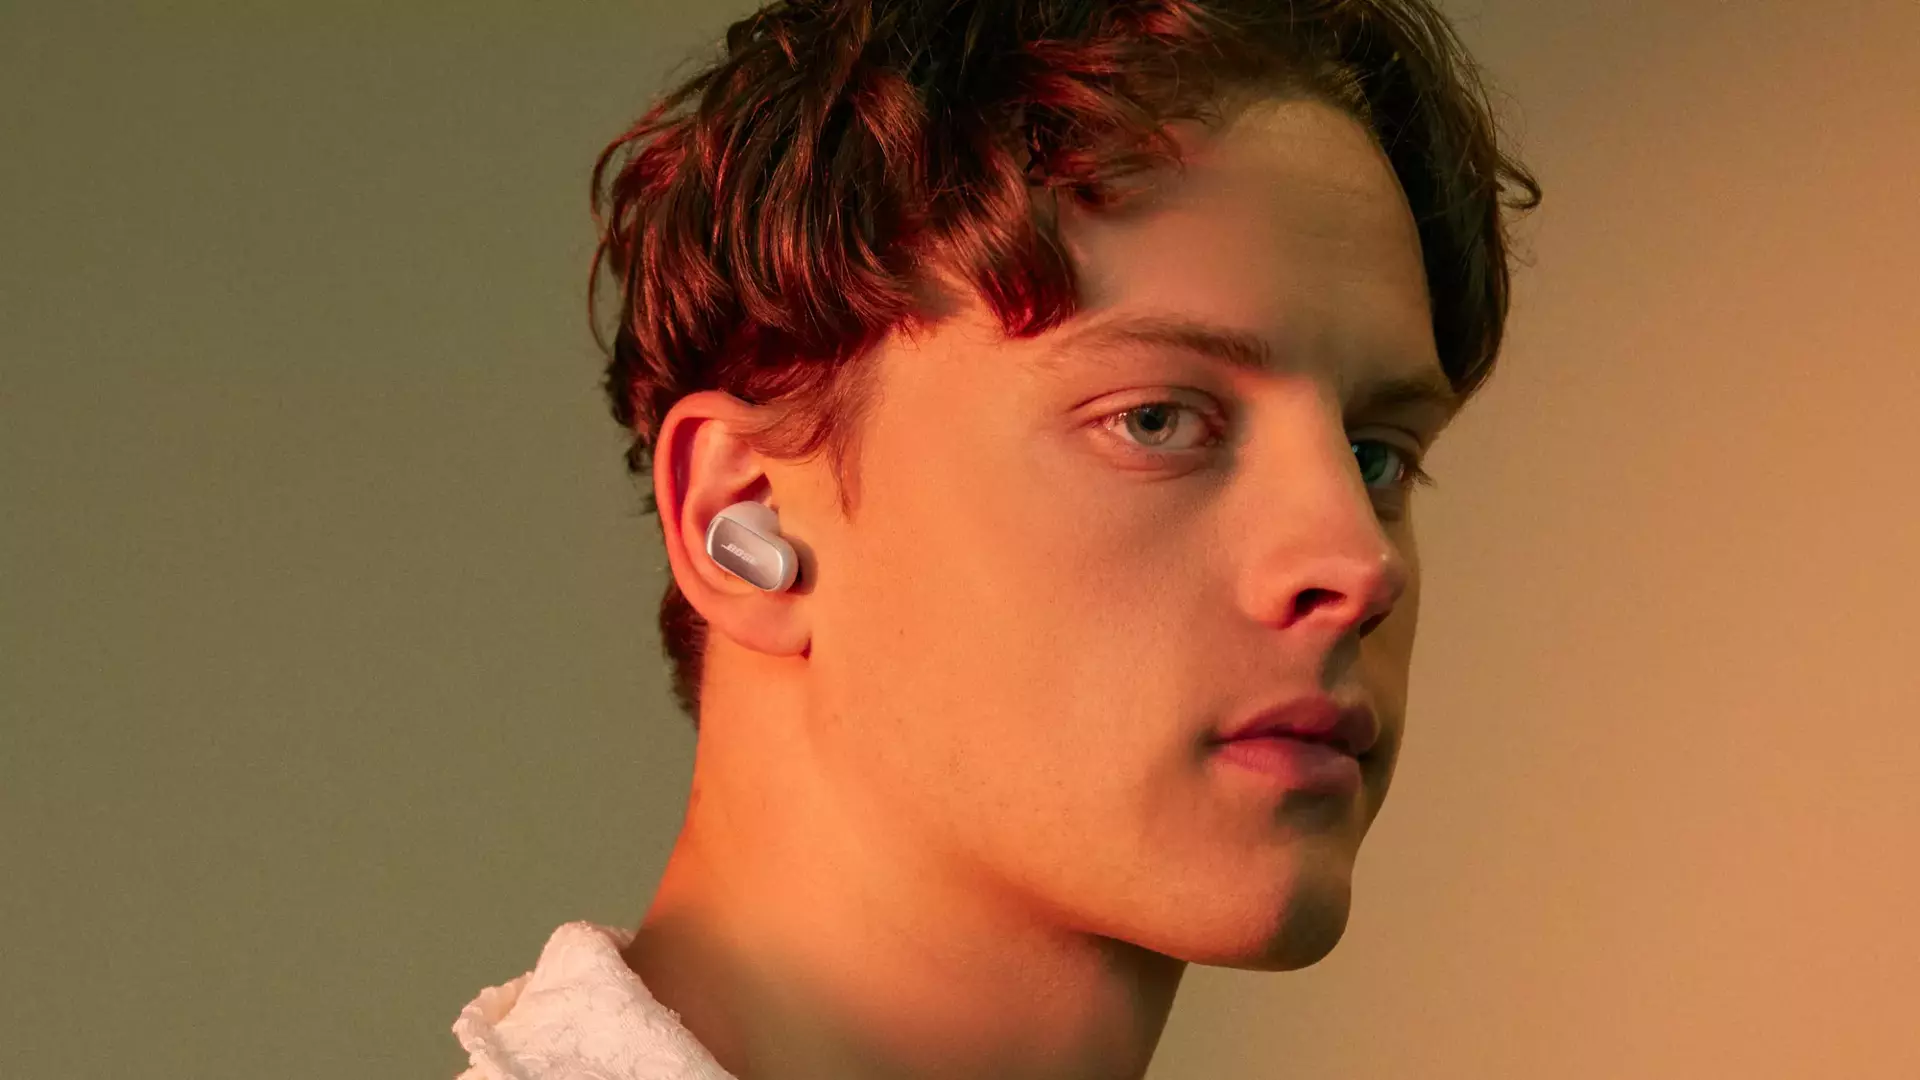 Image of men with QuietComfort Ultra earbuds by Bose